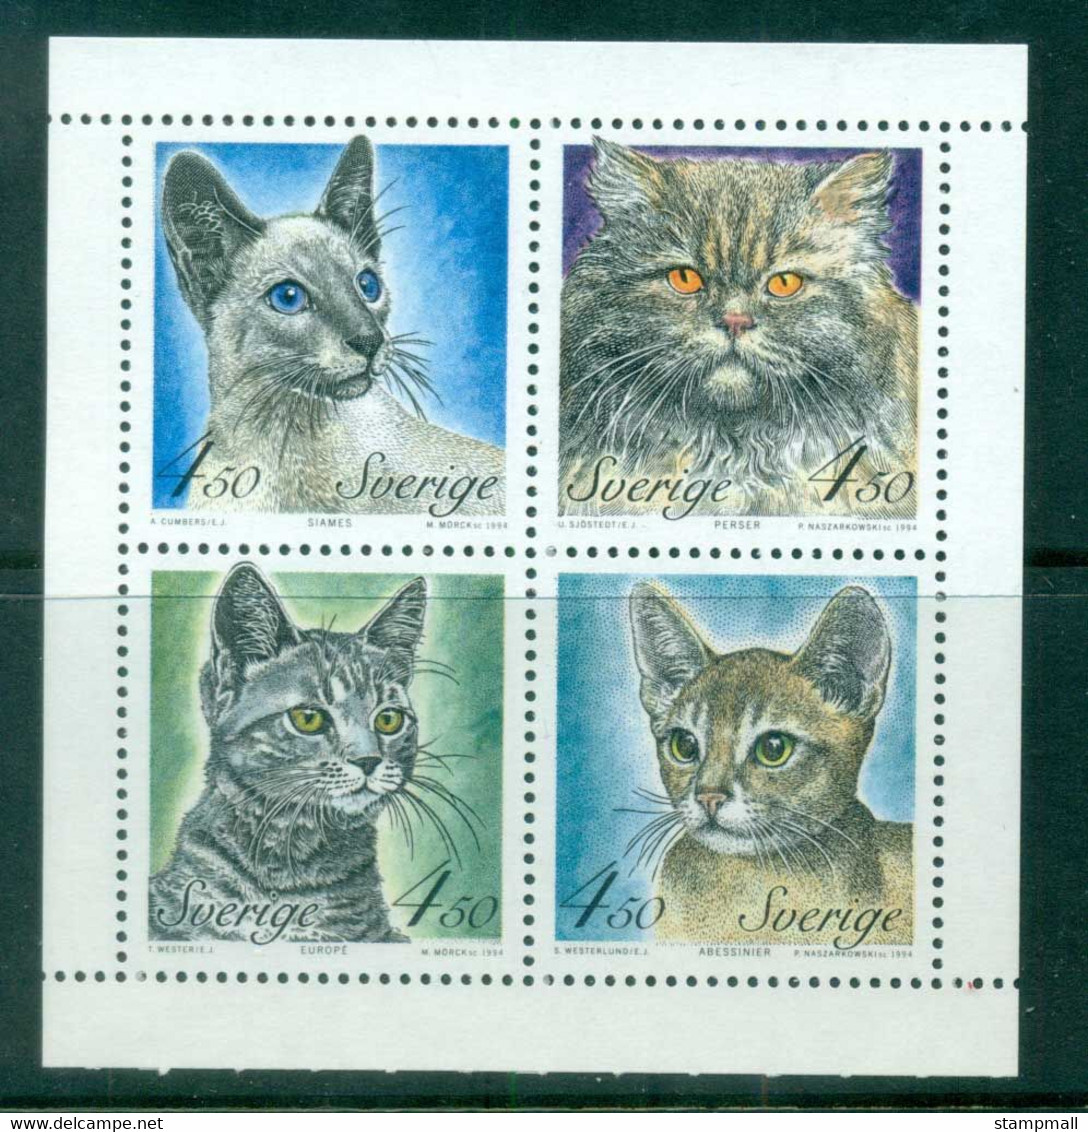 Sweden 1994 Cats Booklet Pane MUH Lot84186 - Unused Stamps